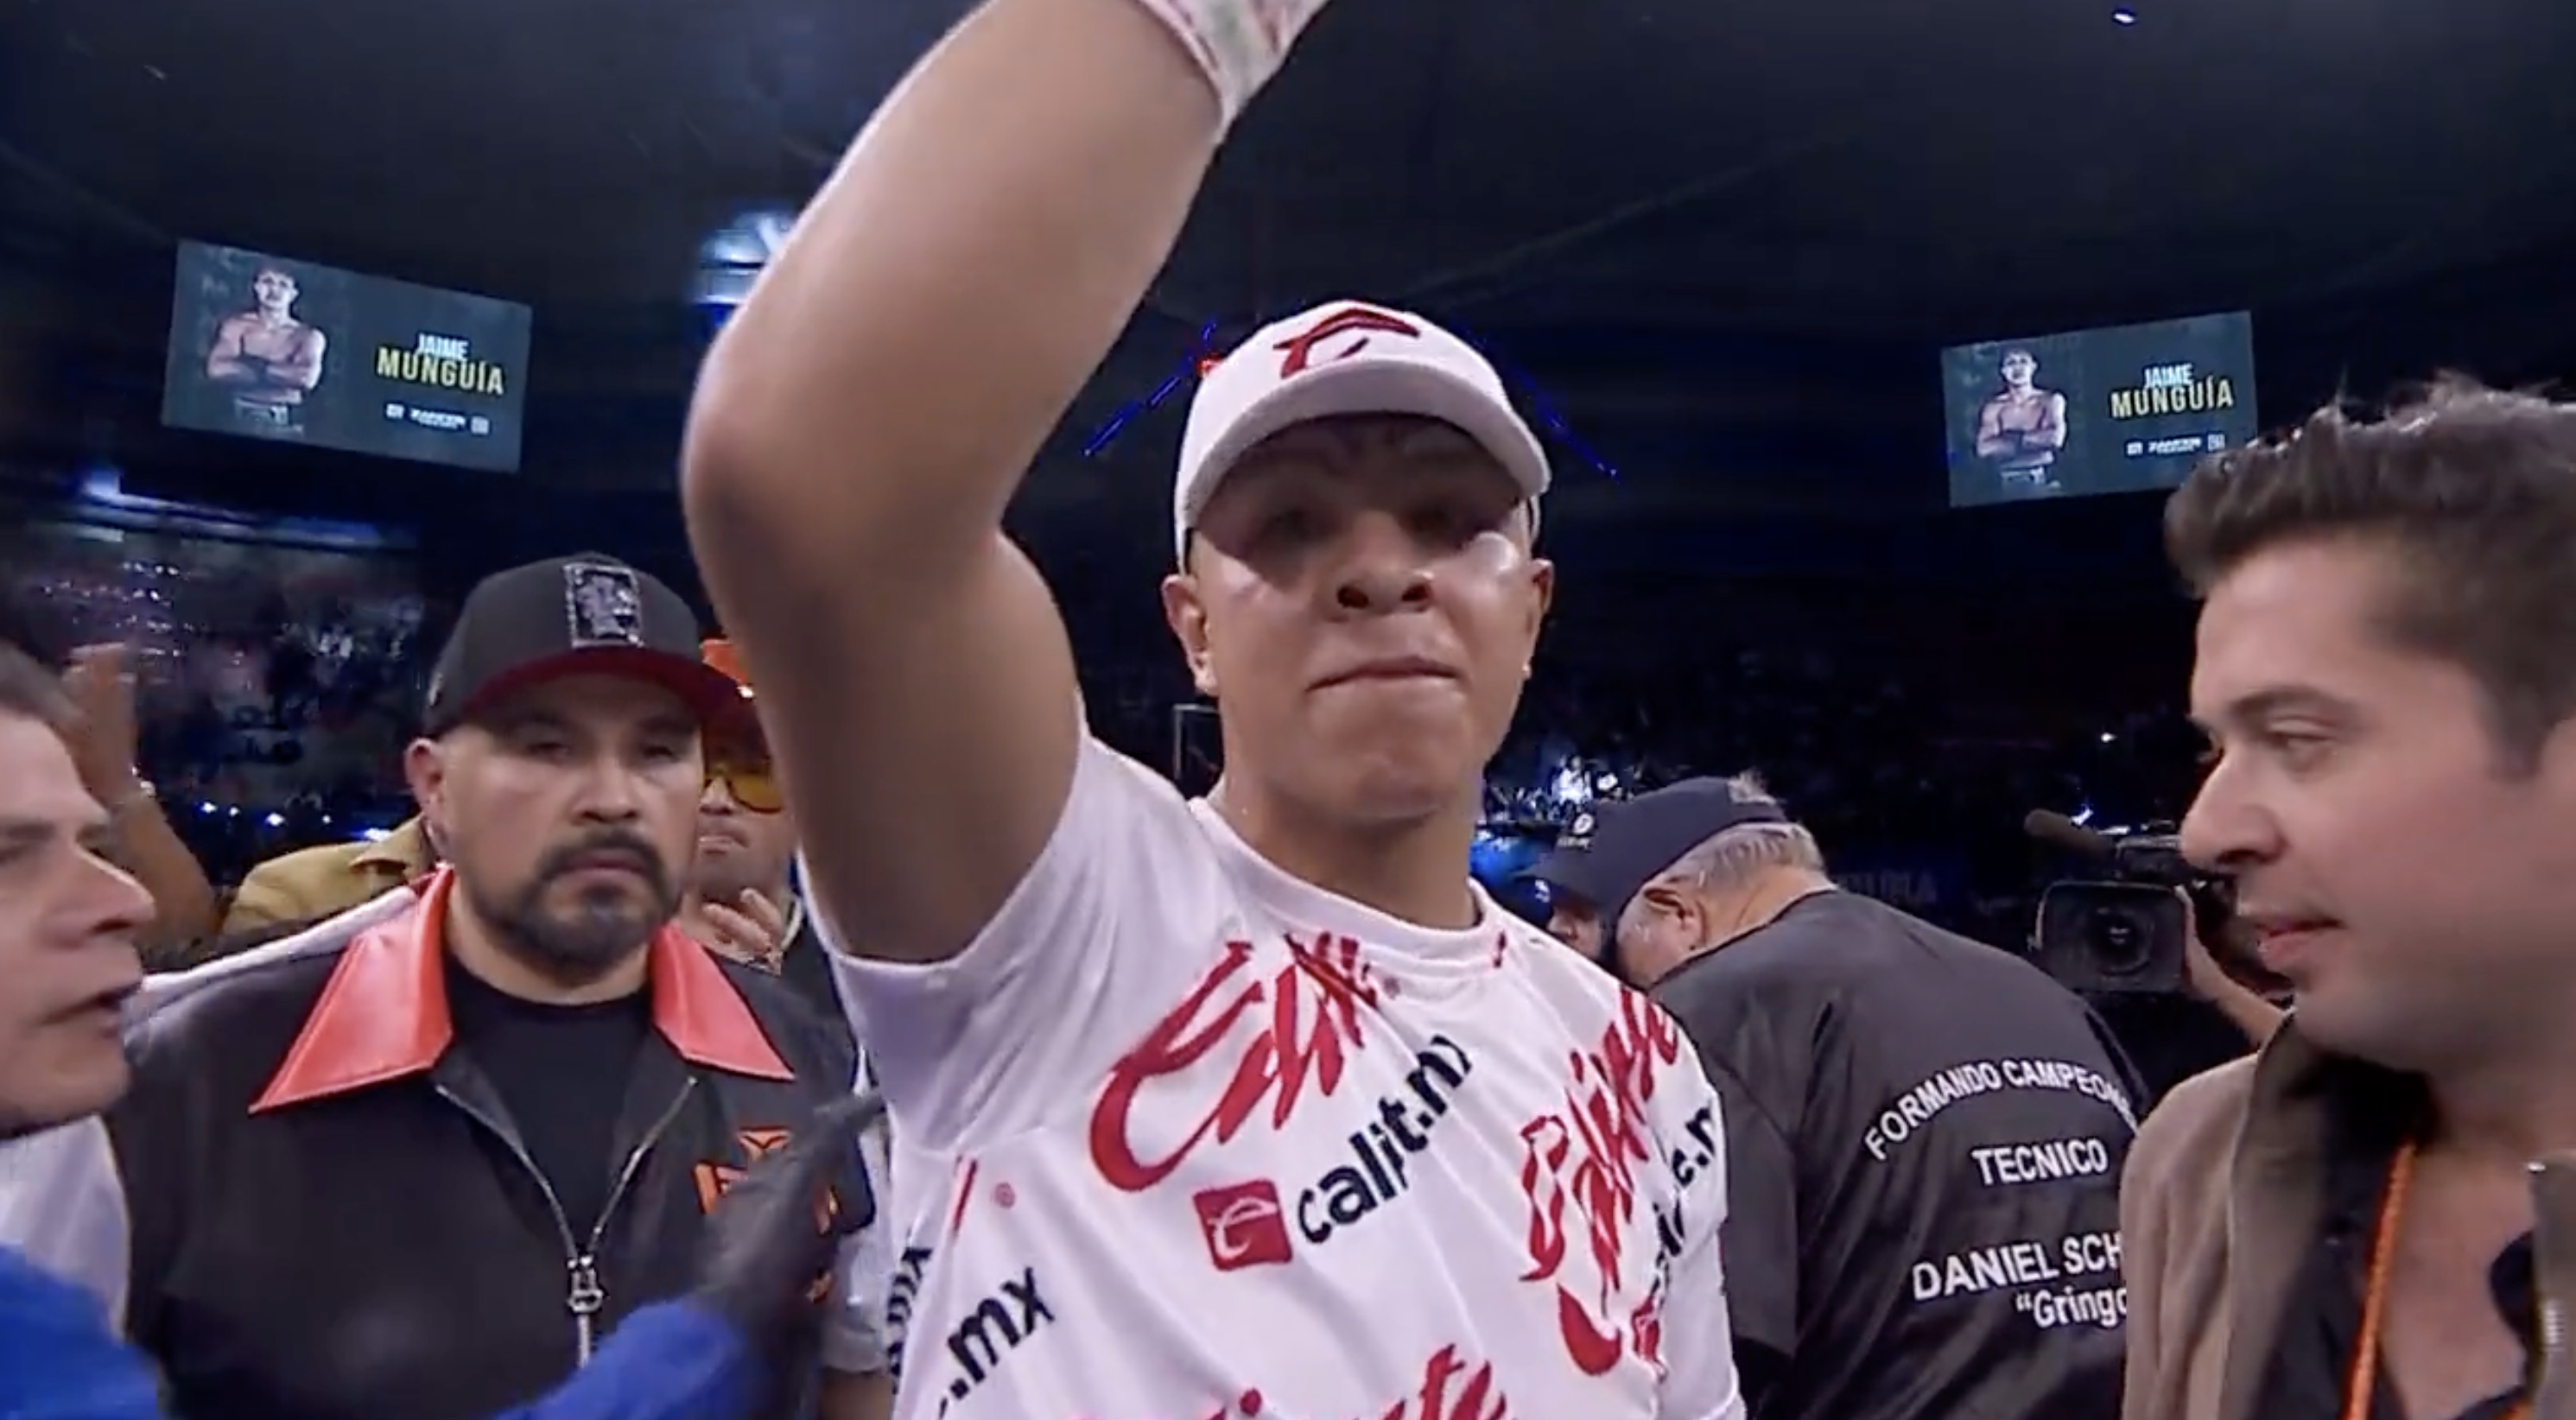 Jaime Munguia used his size and power to stop Gonzalo Coria.